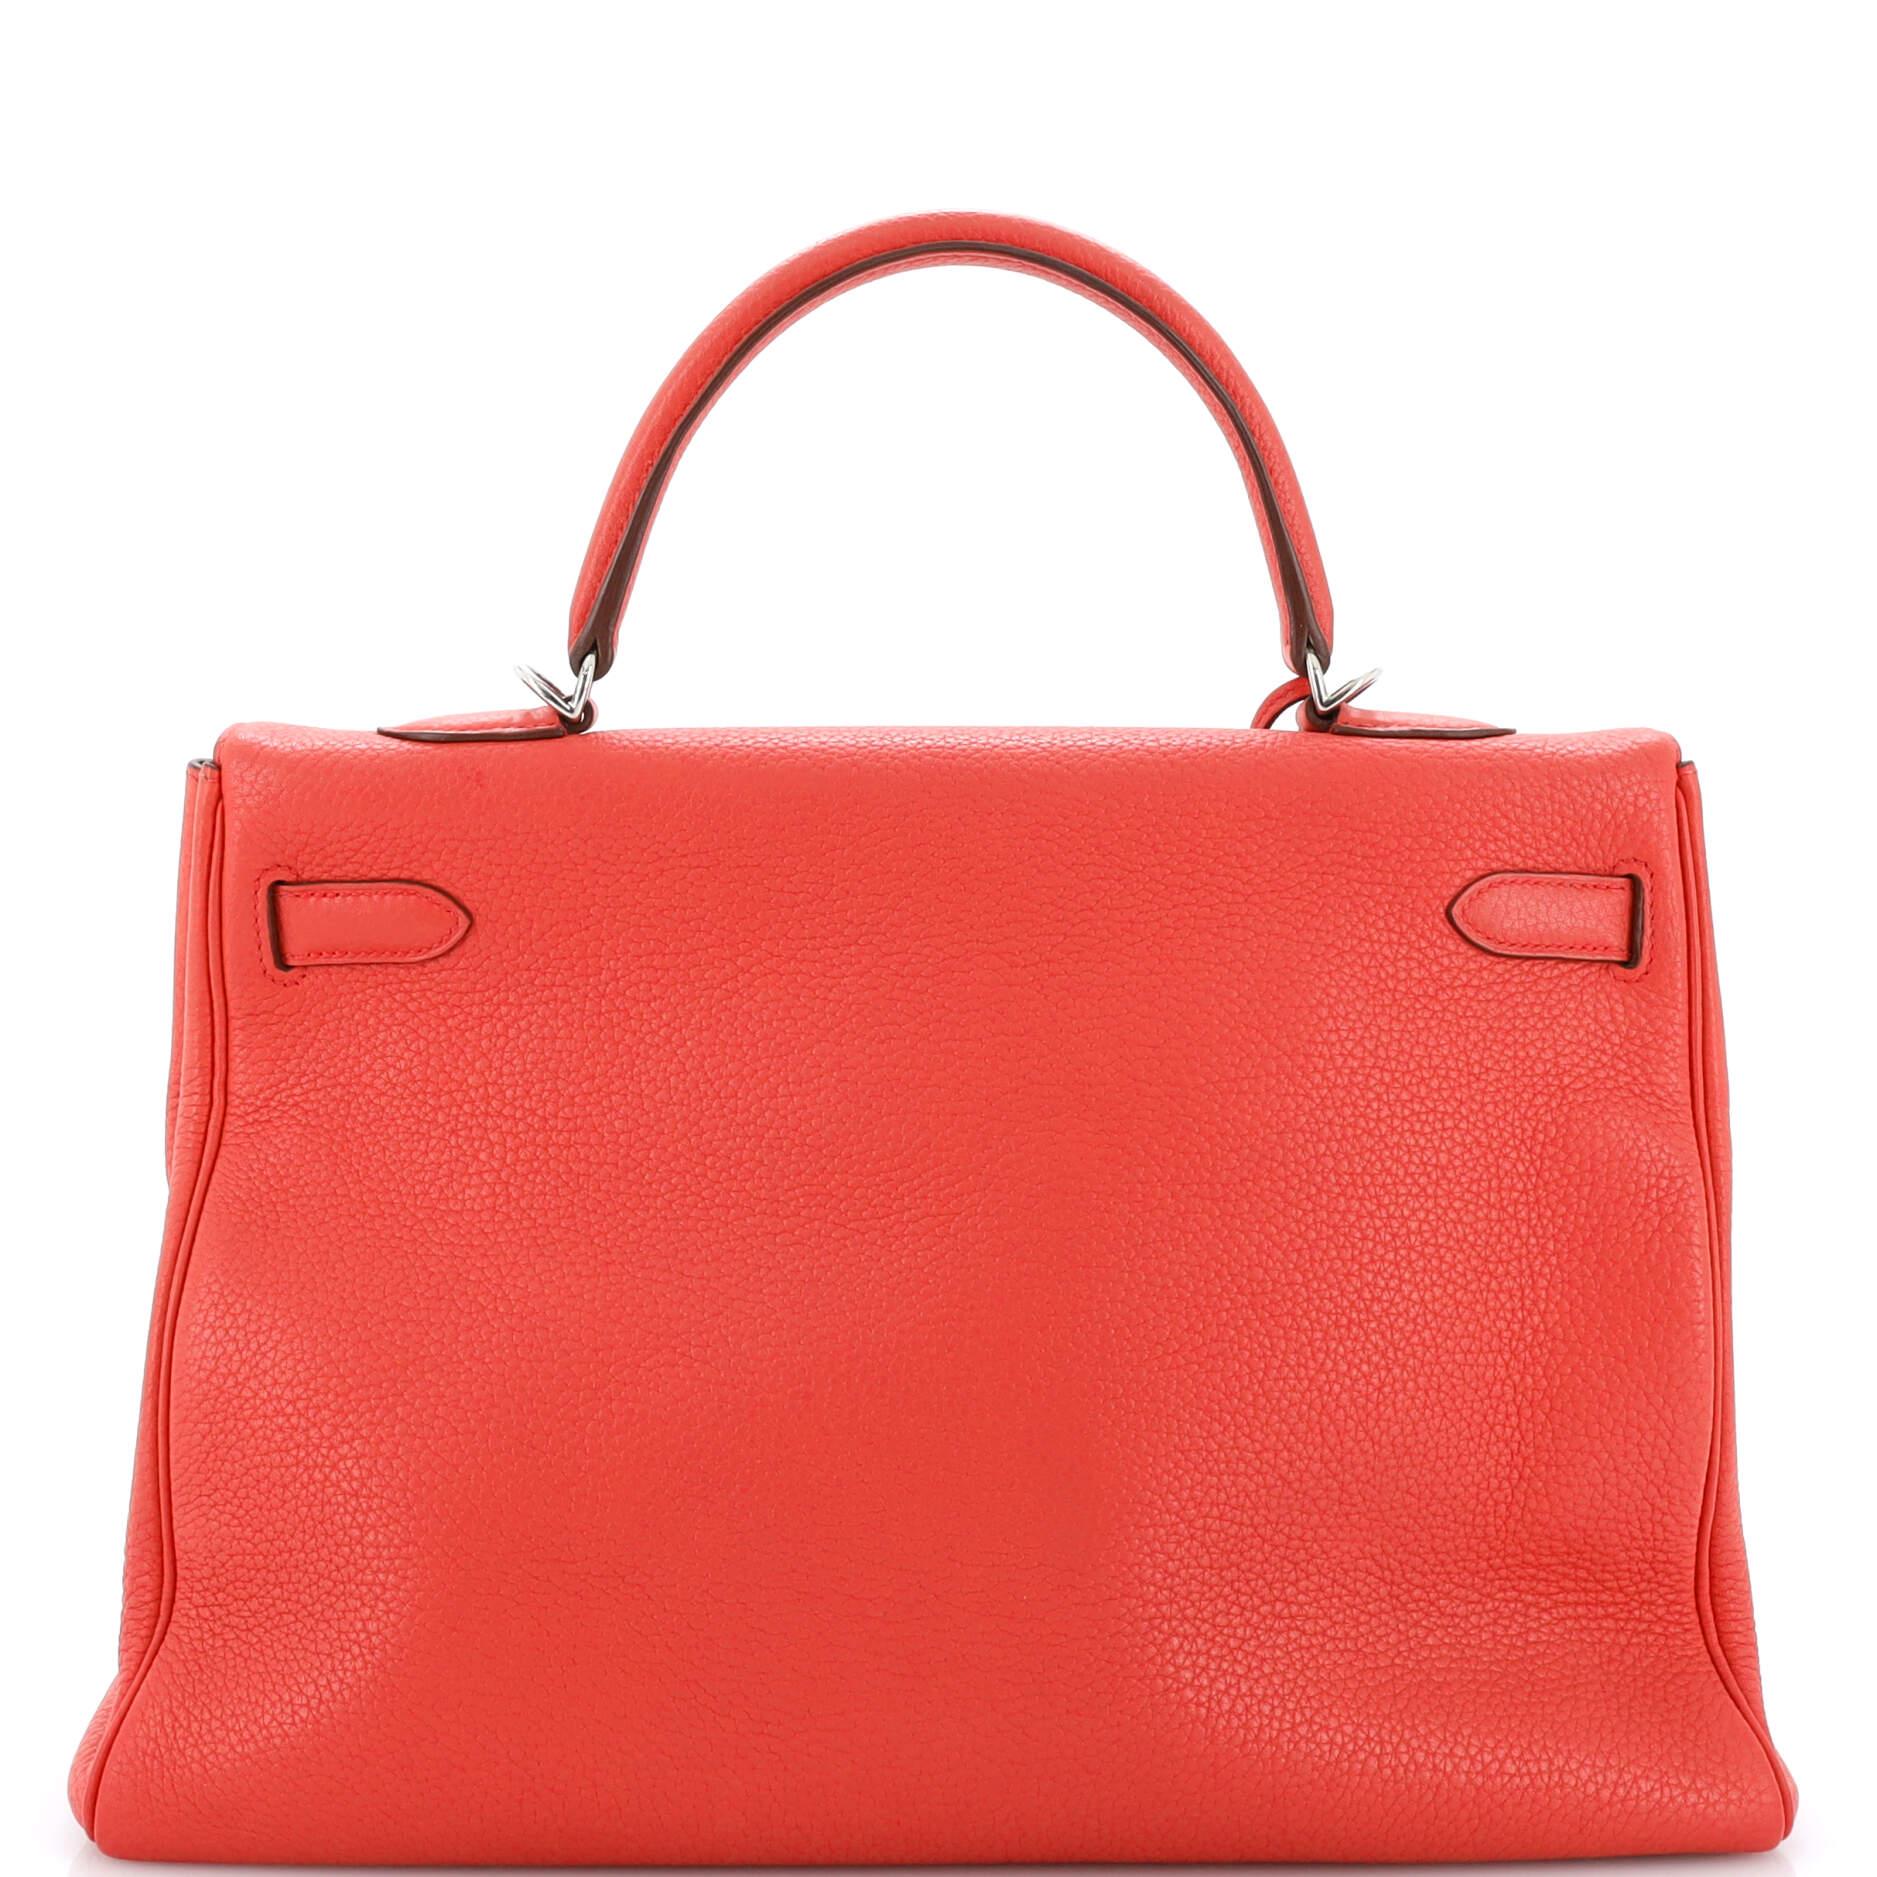 Hermes Kelly Handbag Red Clemence with Palladium Hardware 35 In Good Condition For Sale In NY, NY